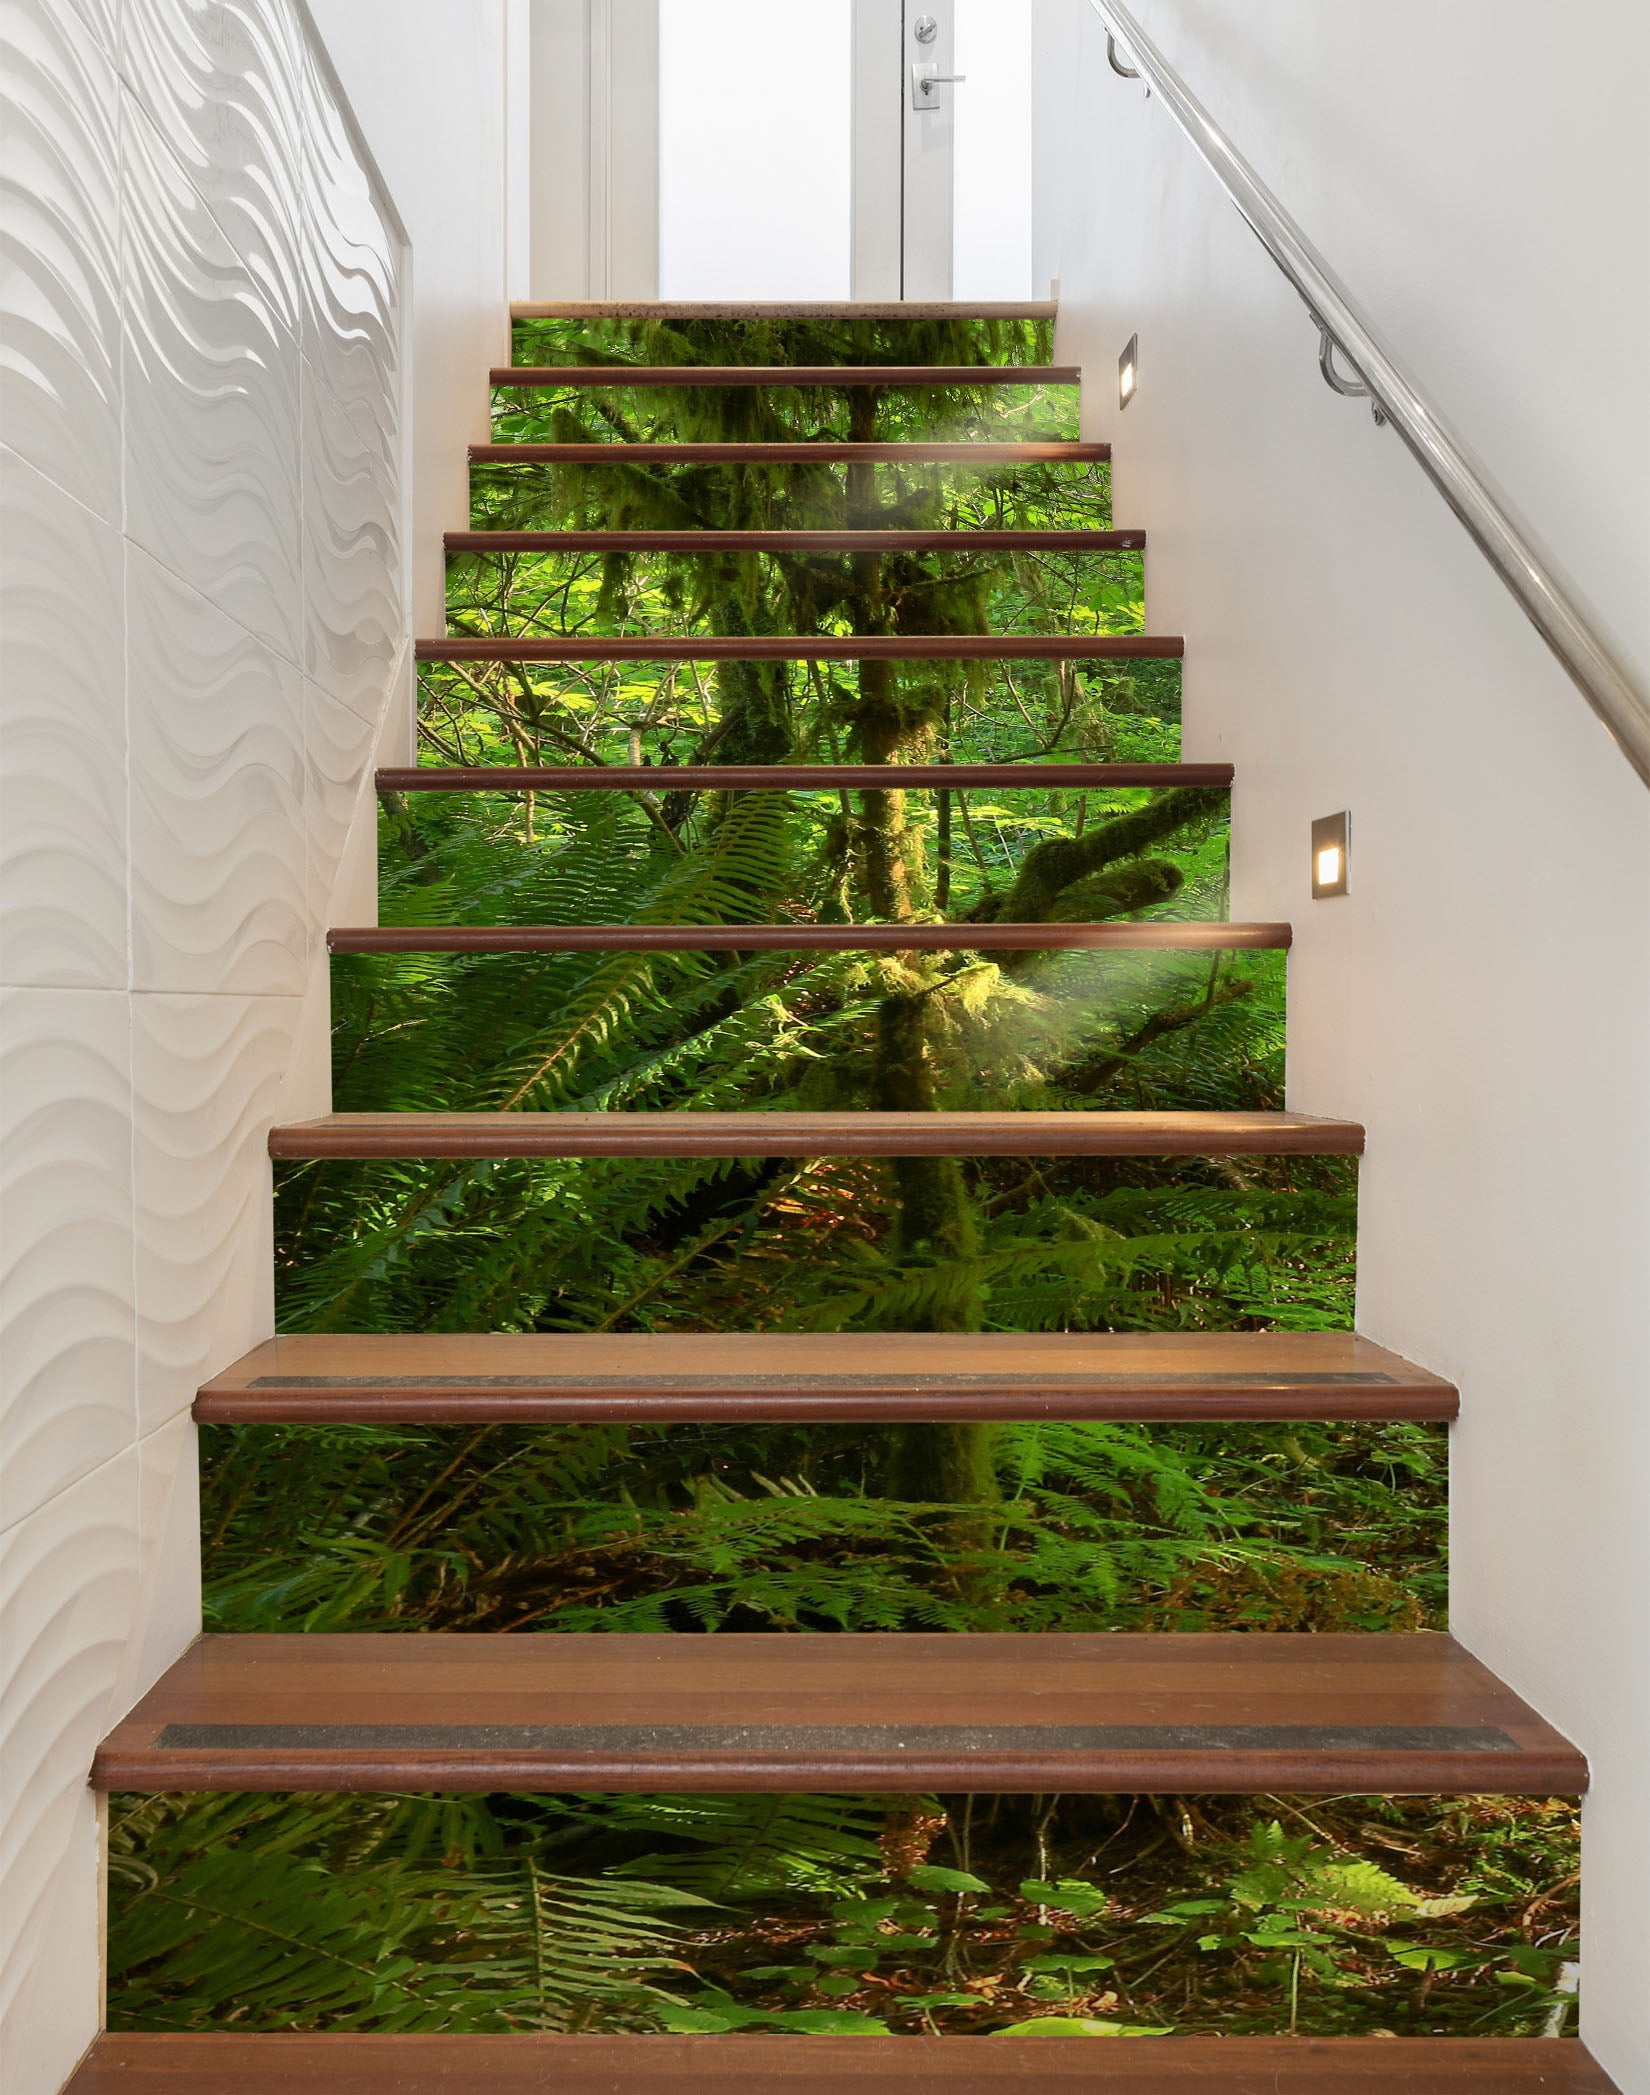 3D Jungle 9915 Kathy Barefield Stair Risers